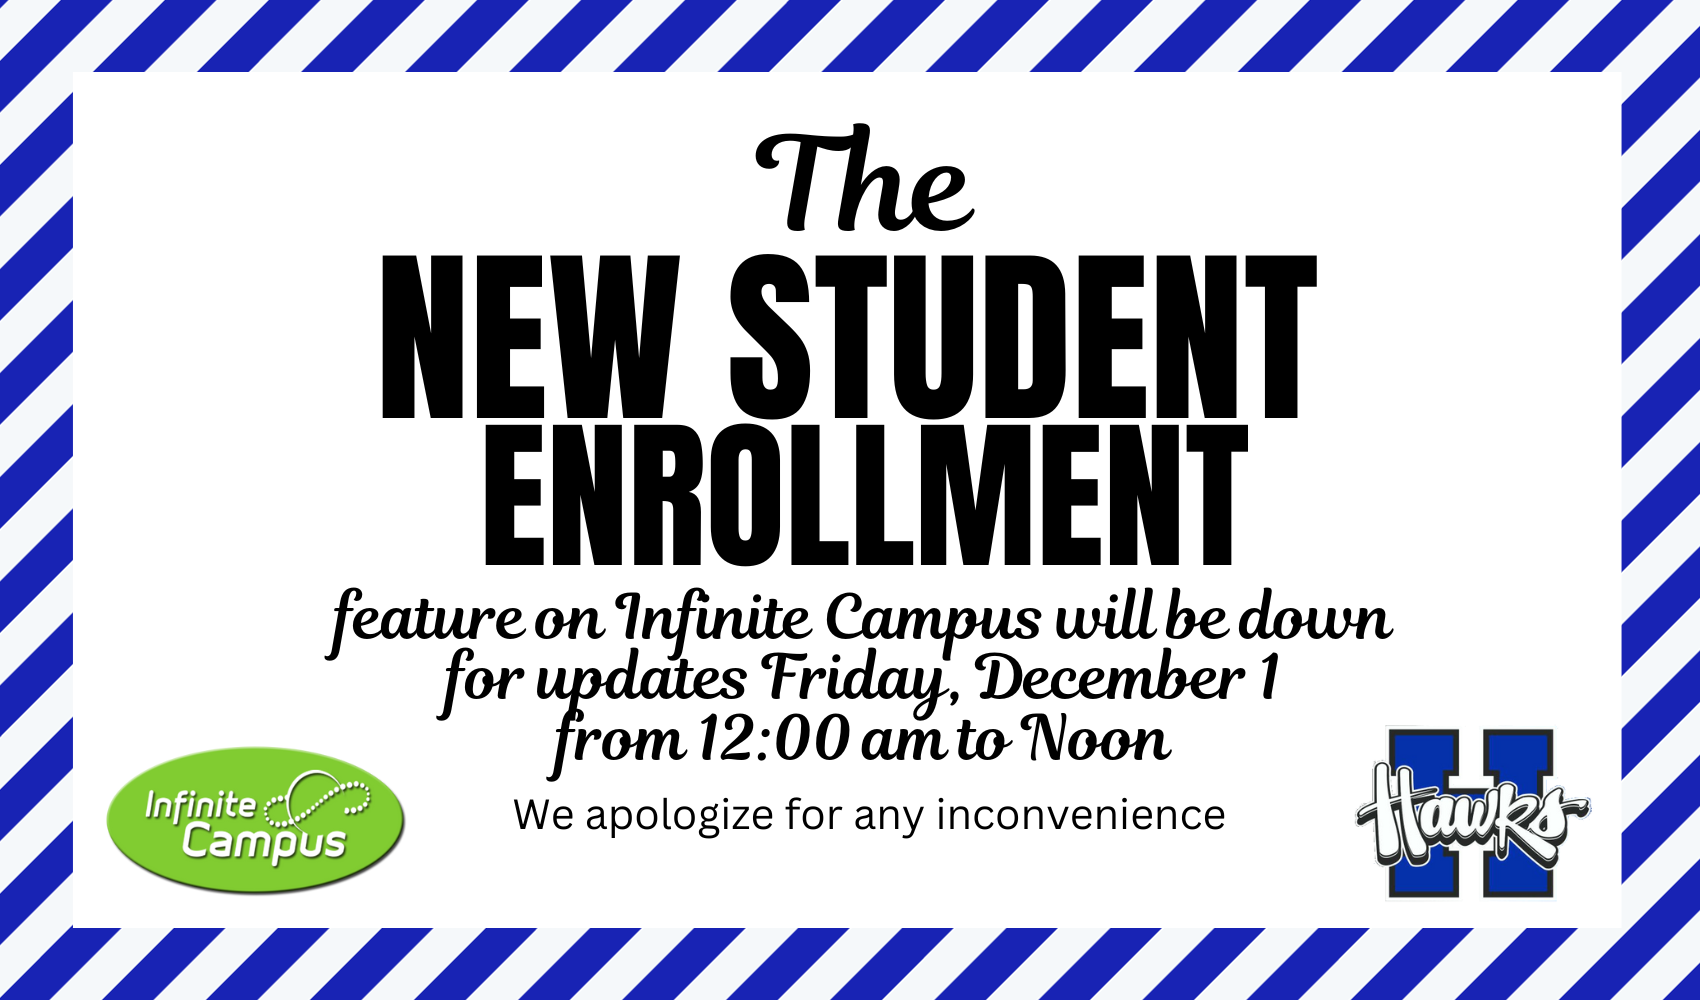 new student enrollment will be down for updates from midnight to noon on friday december 1